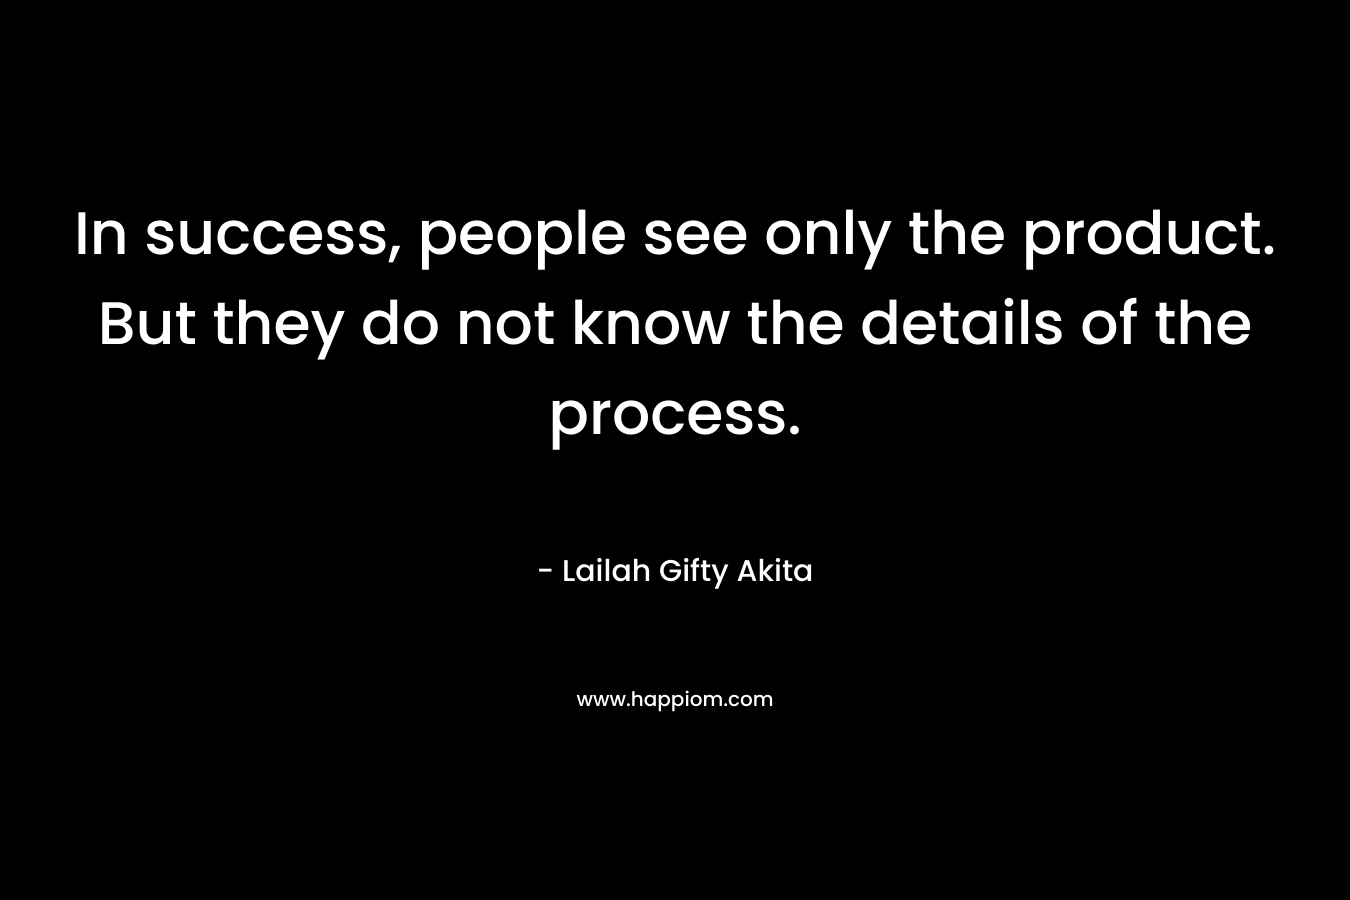 In success, people see only the product. But they do not know the details of the process. – Lailah Gifty Akita